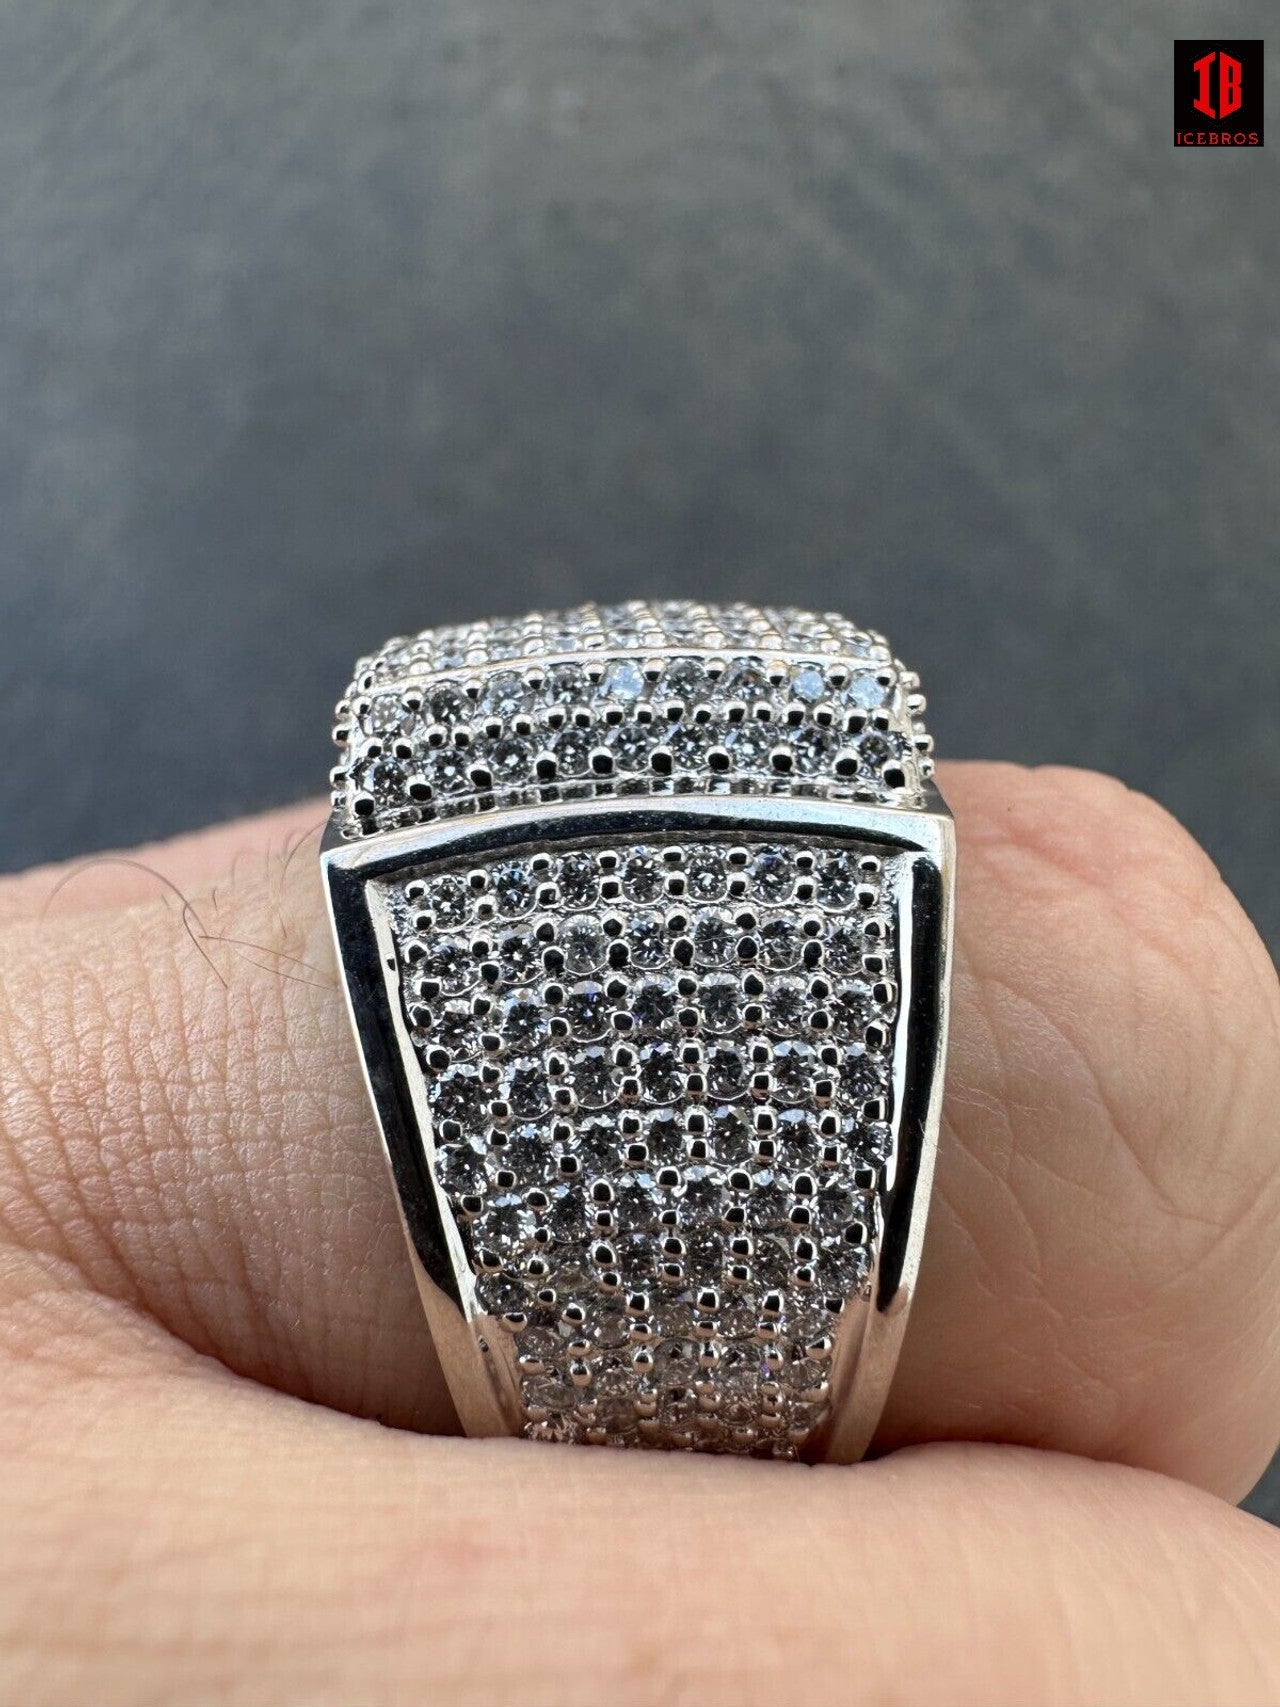 4.49ct Real Diamond Hip Hop 4.49ct Real Diamond Hip Hop Solid 14k White Gold Iced Square Micropave Ring 14g